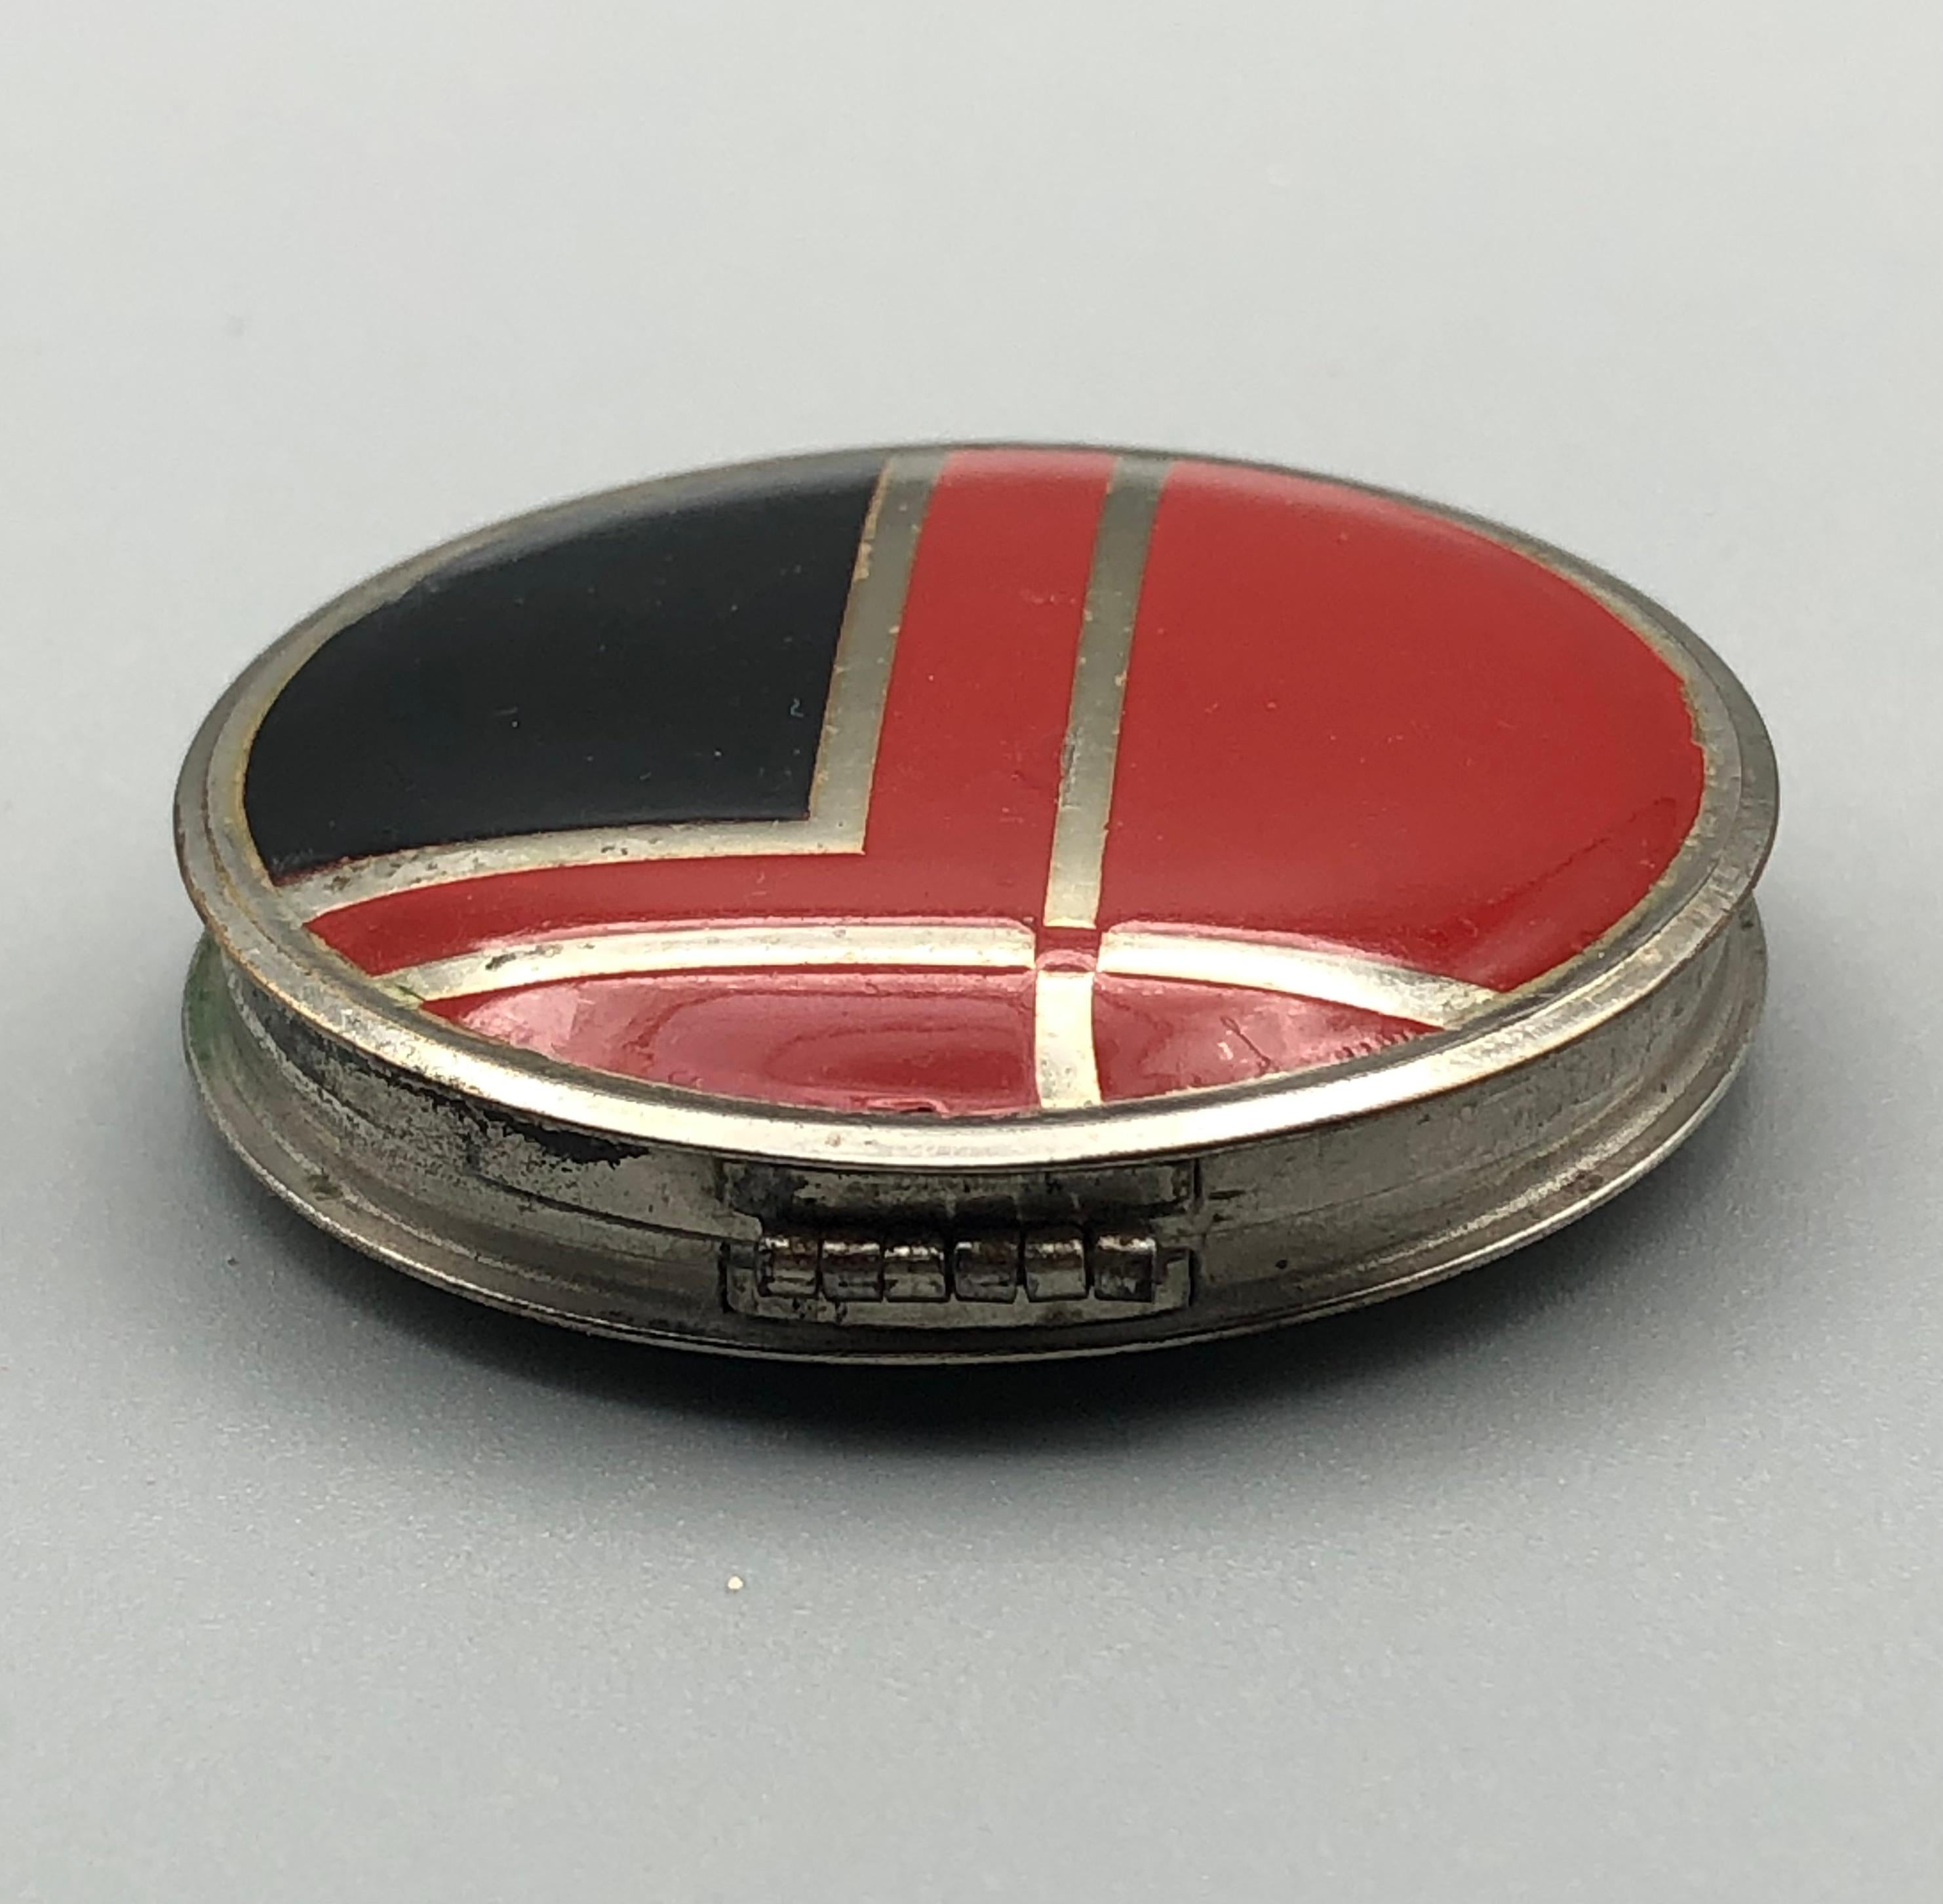 Art Deco Black & Red Enamel Round Powder Compact 1920's For Sale 3